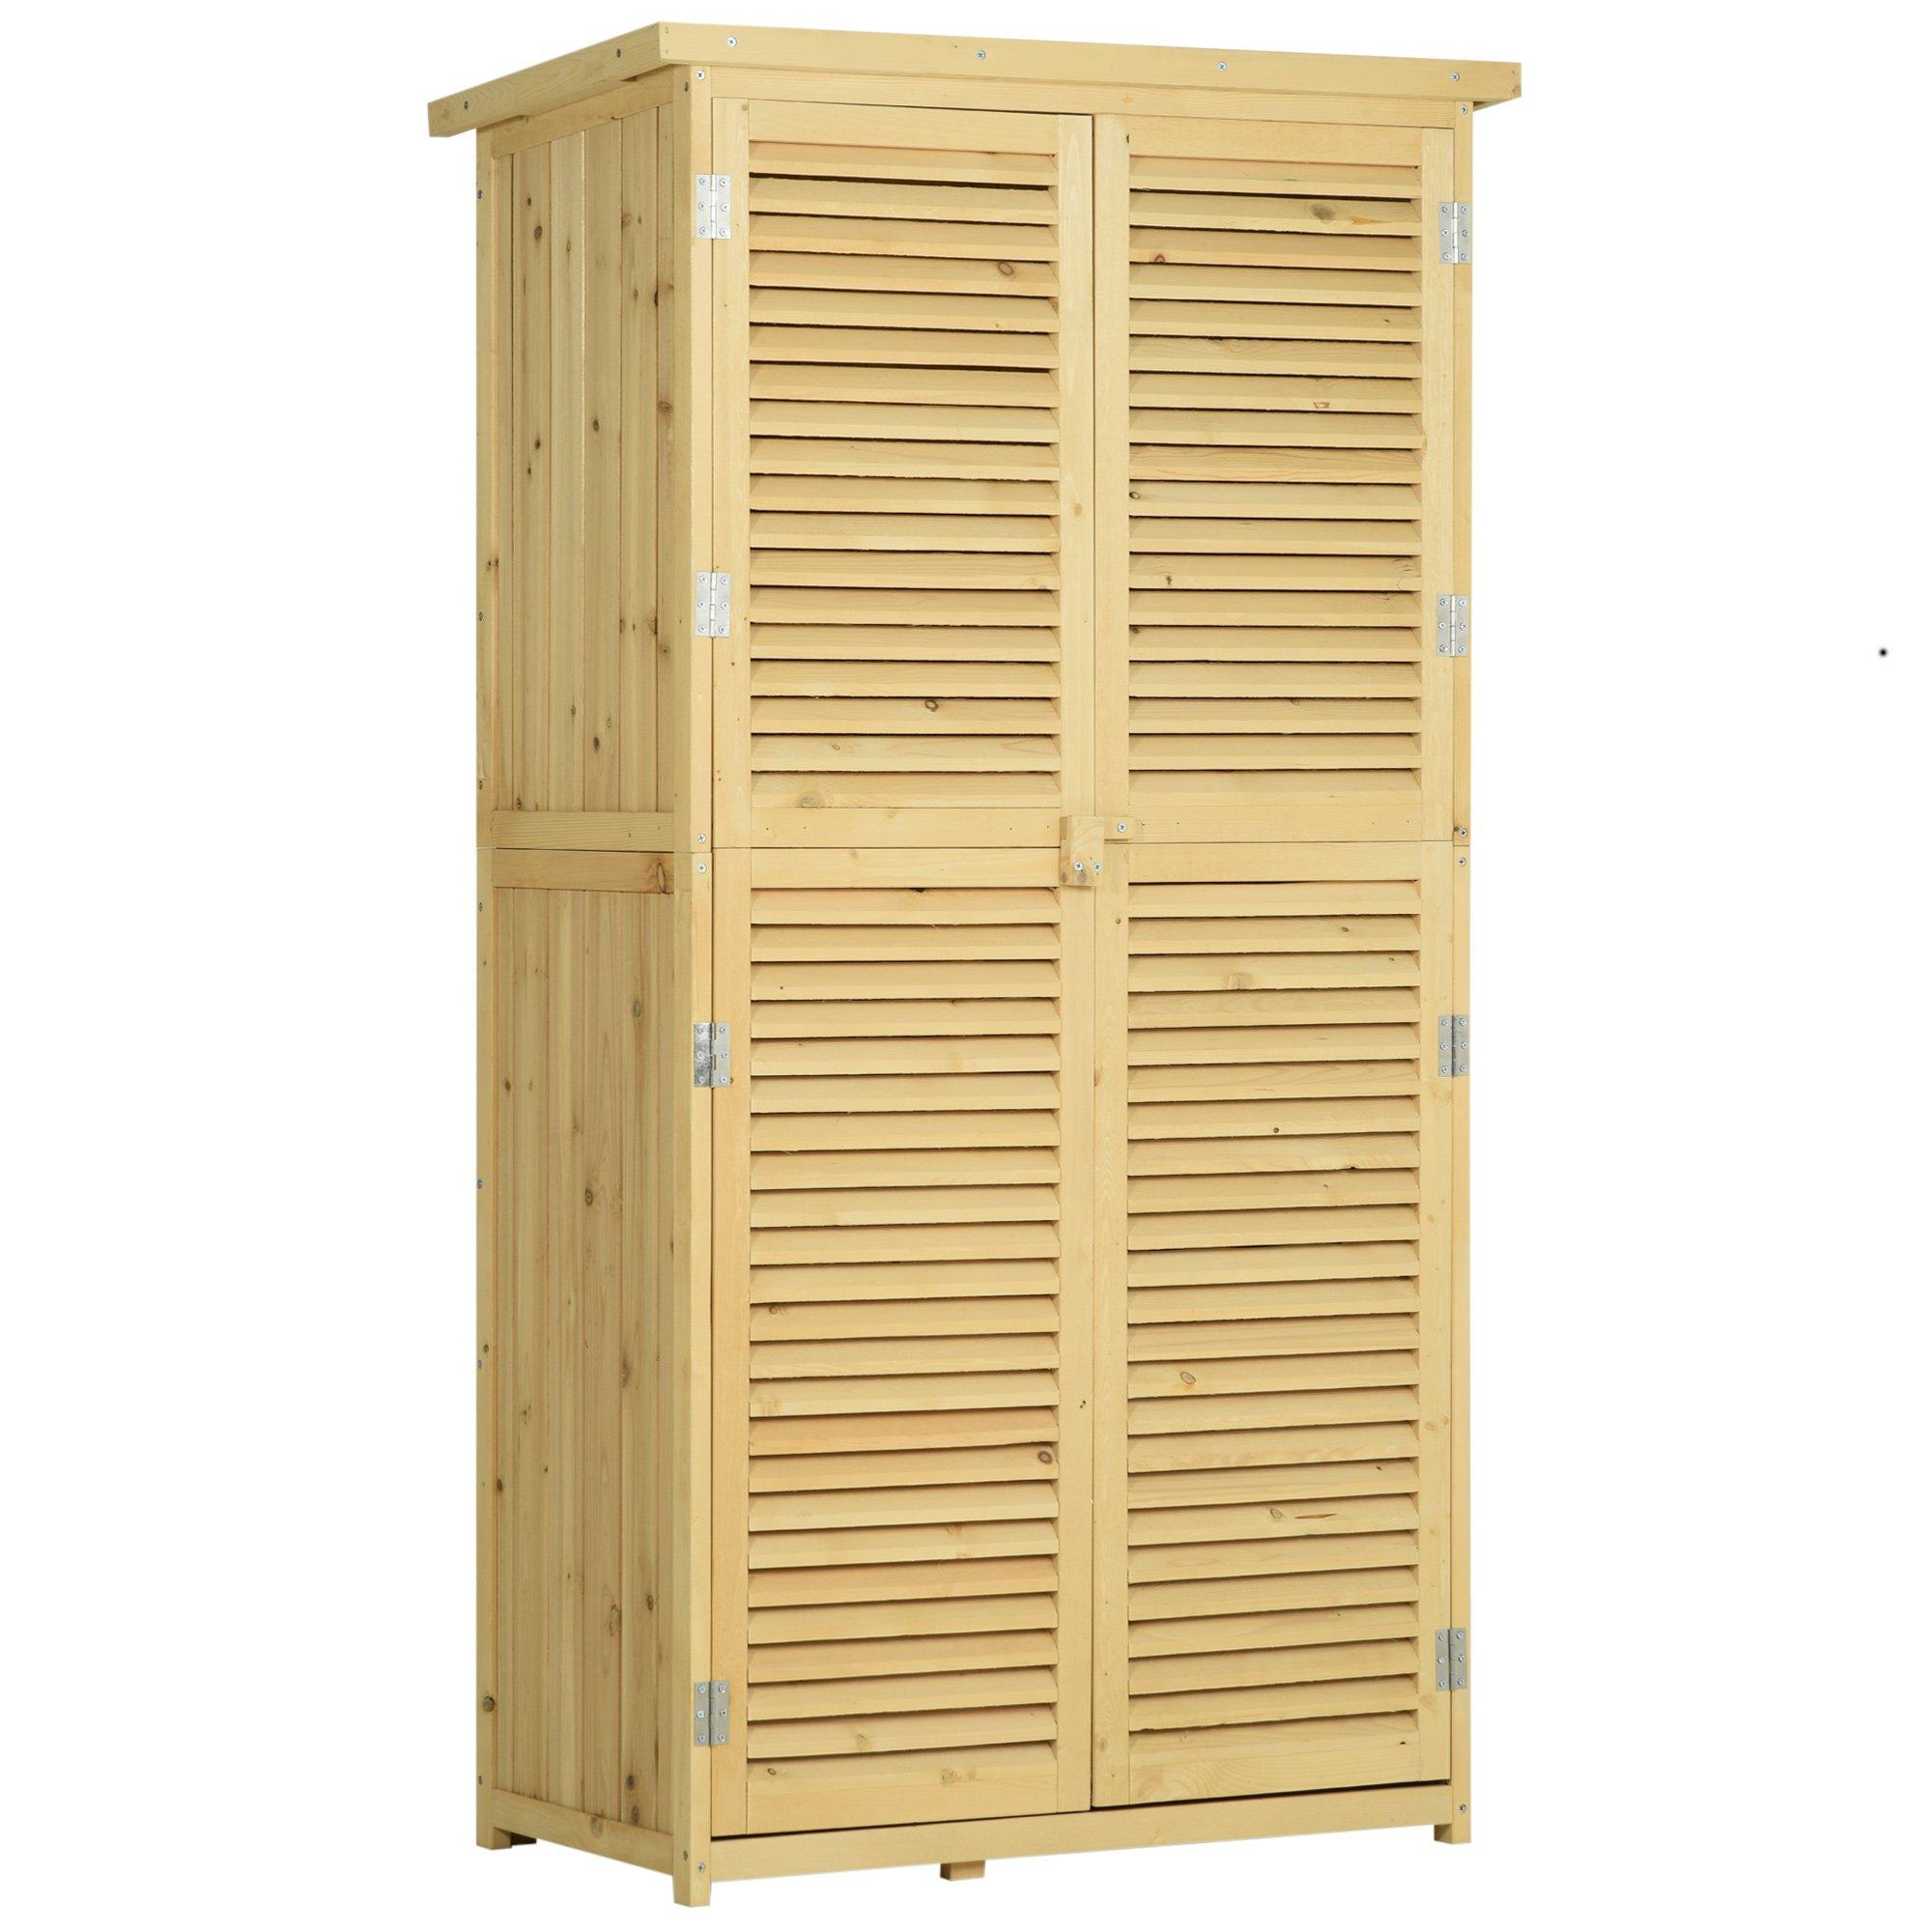 Outsunny 87 x 47 x 160cm Wooden Garden Storage Shed - Natural